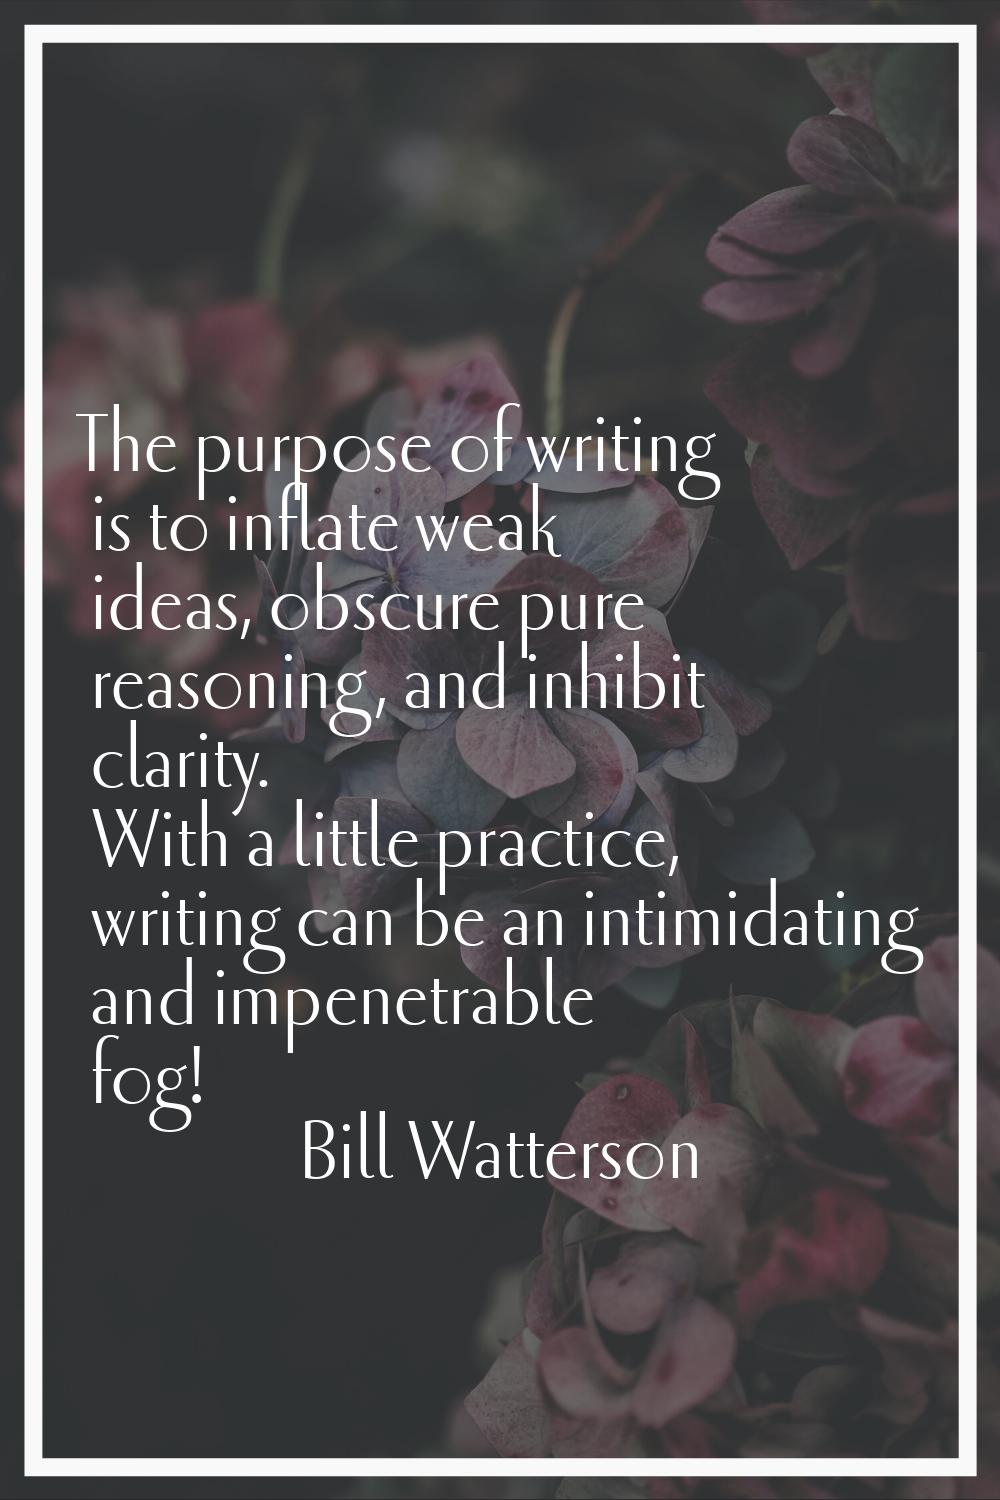 The purpose of writing is to inflate weak ideas, obscure pure reasoning, and inhibit clarity. With 